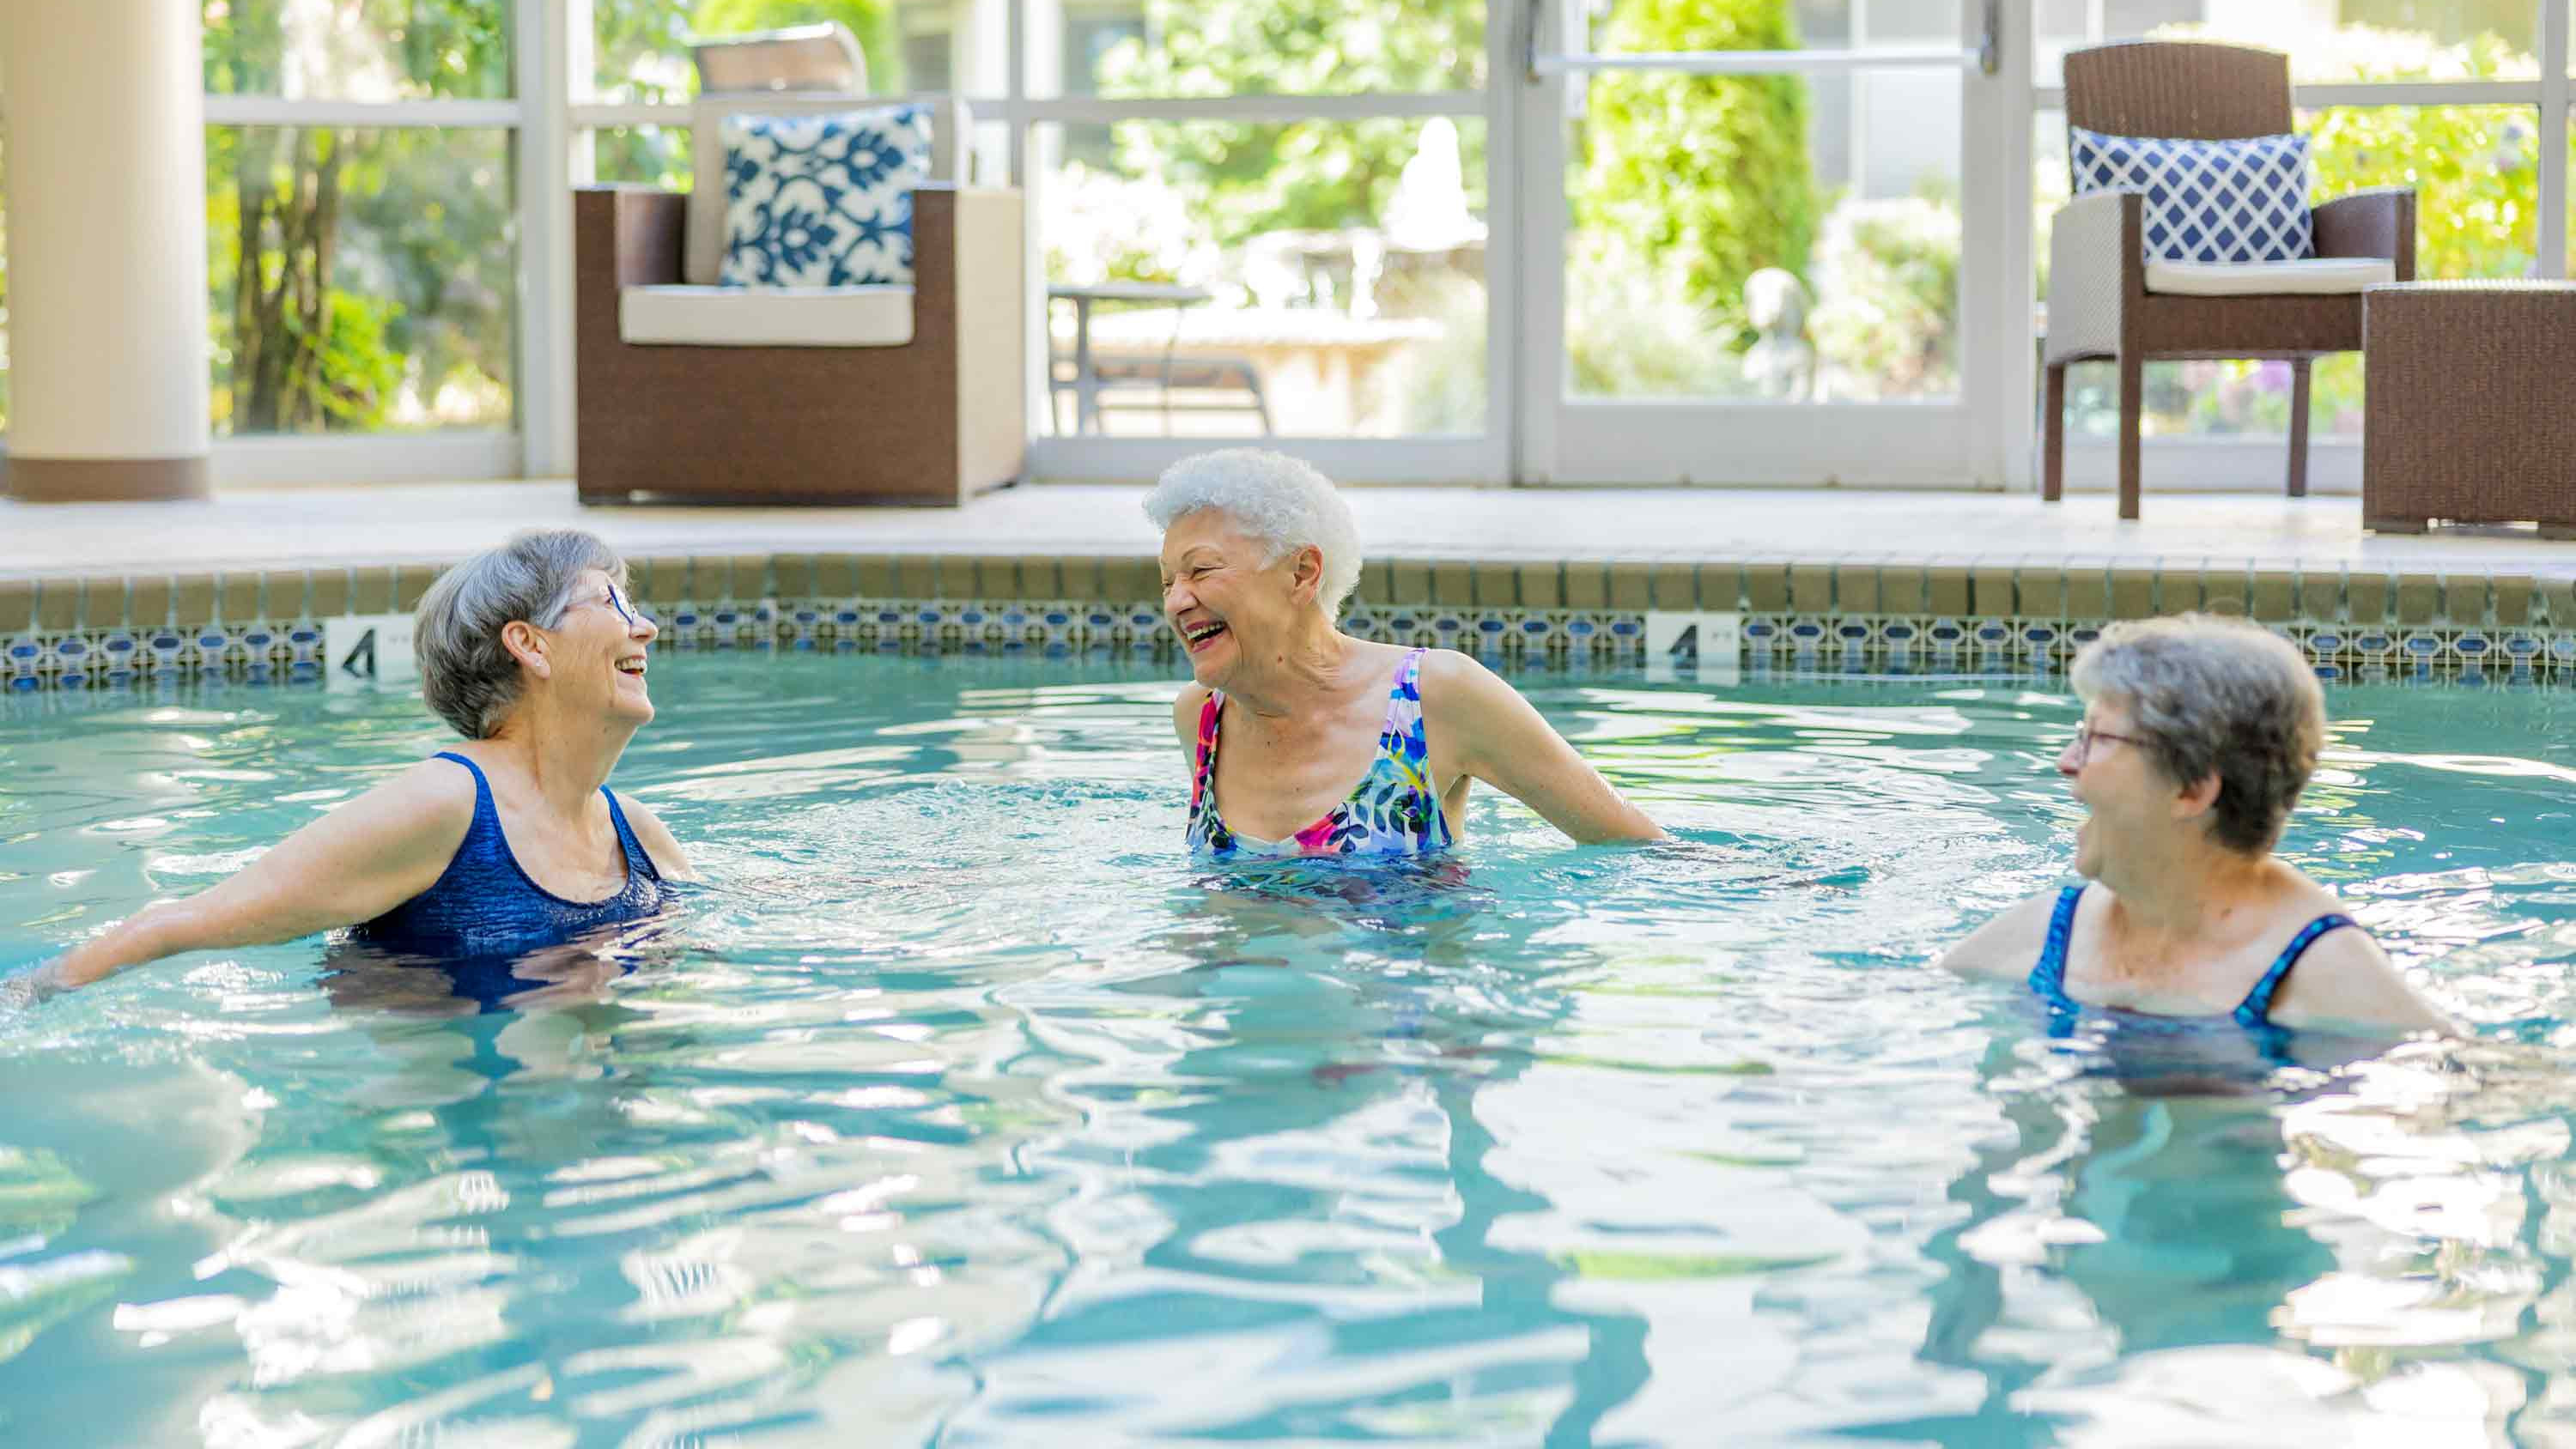 Residents enjoy exercise and good company in the pool